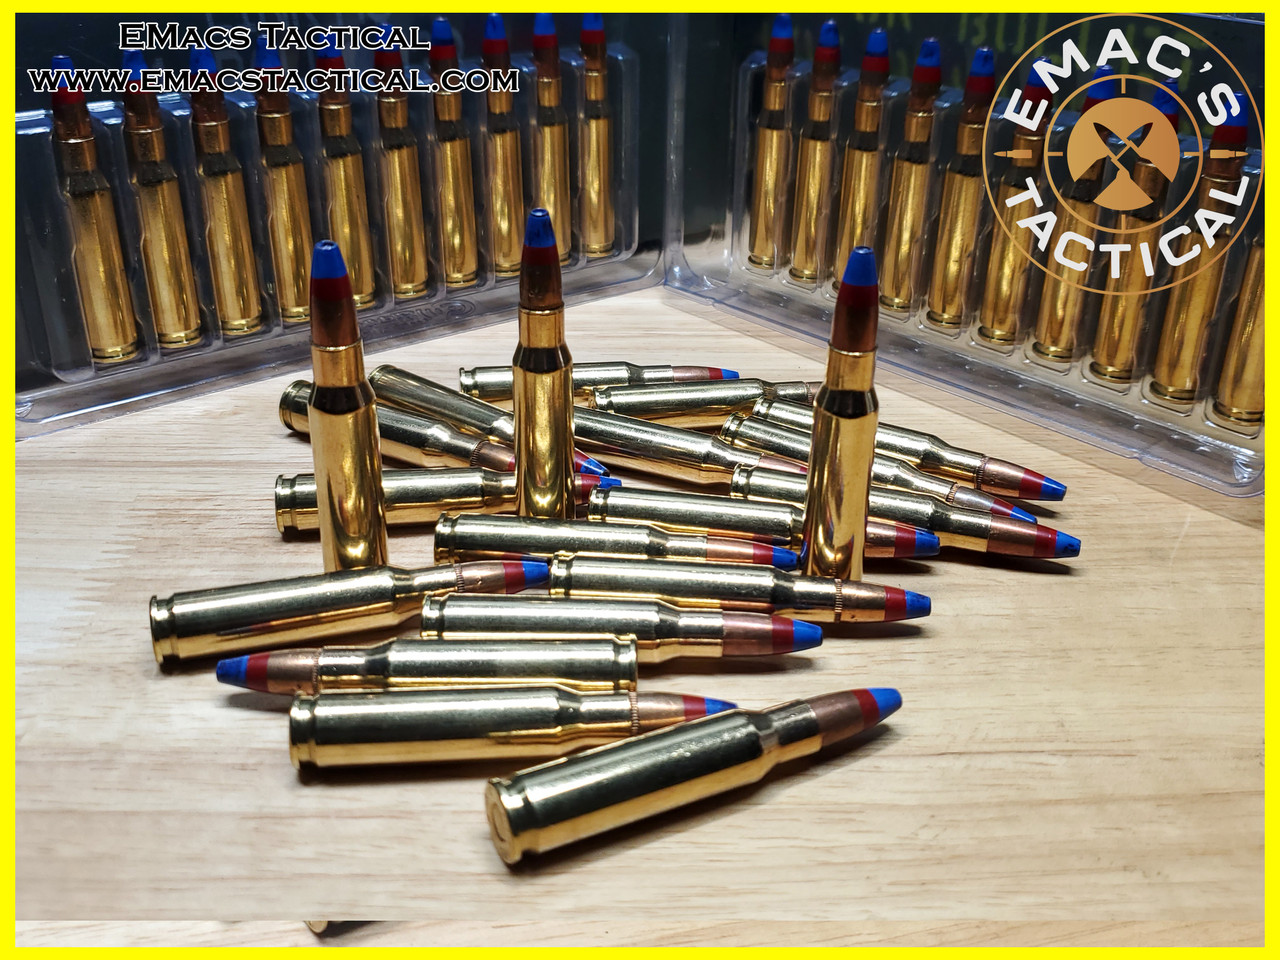 308/7.62x51 Tracer-Incendiary [20x] Count Specialty Ammunition